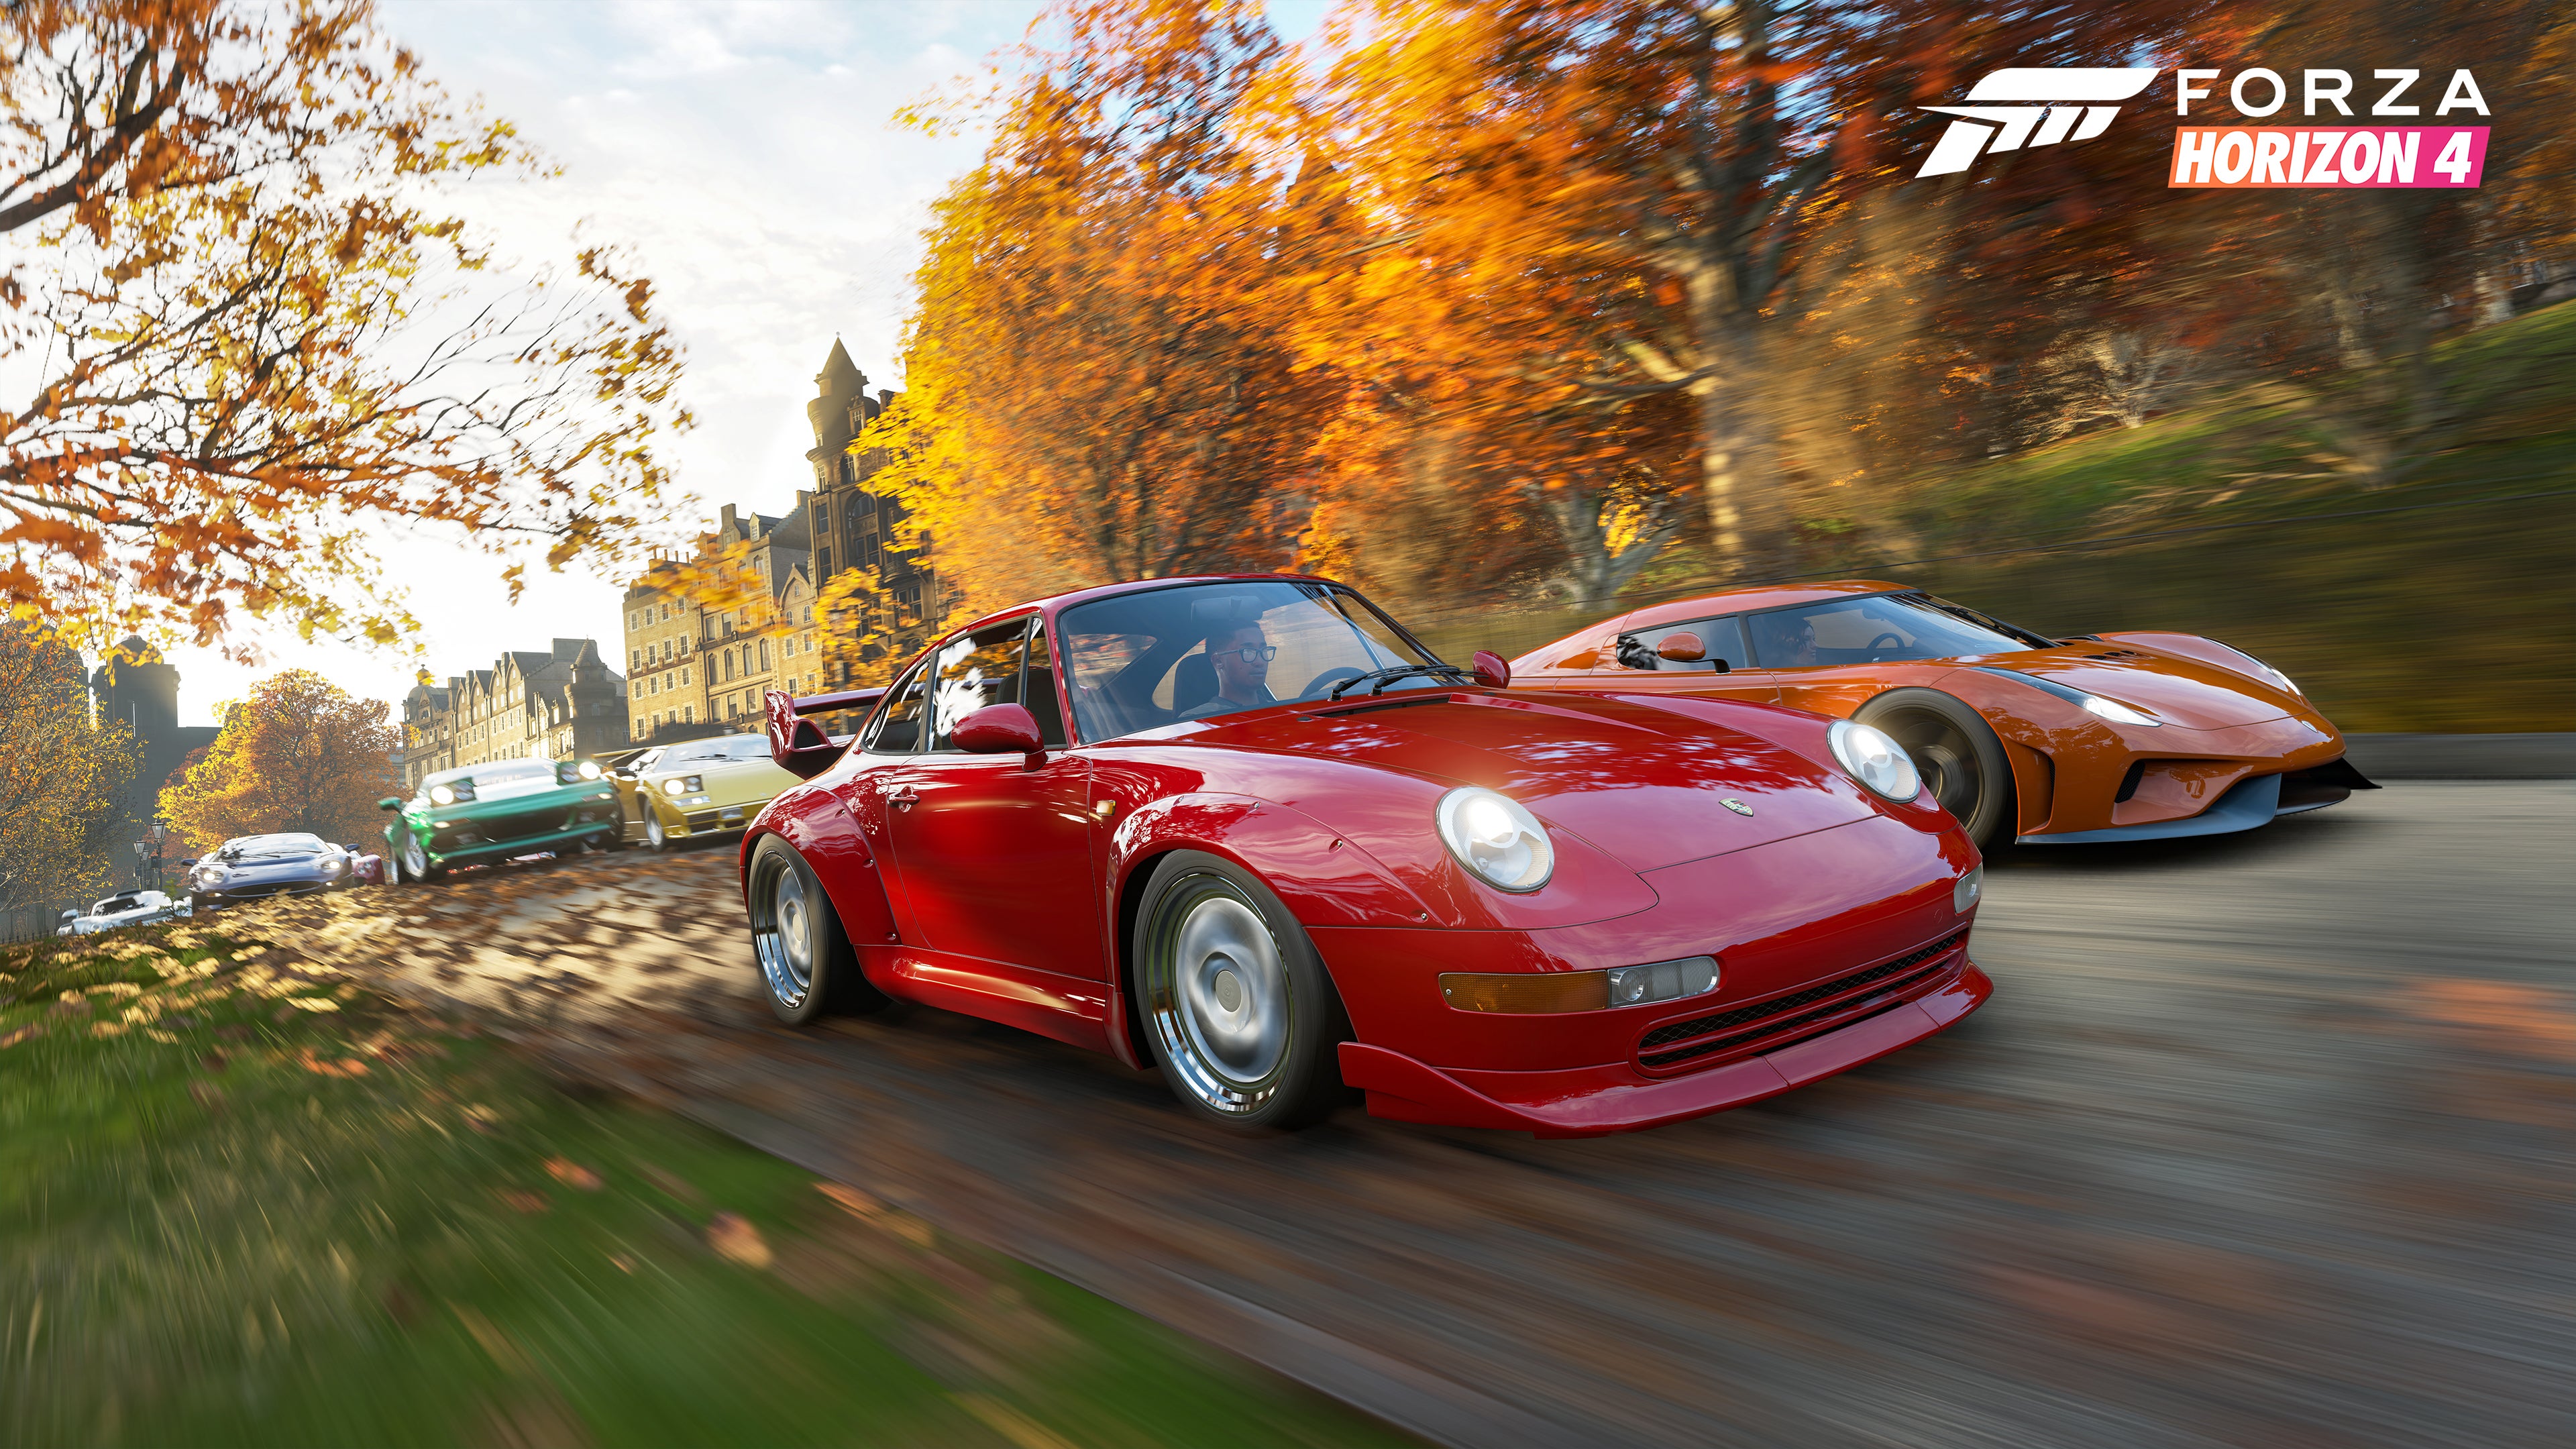 Image for Forza Horizon 4 Removes the "Floss" and "Carlton" Emotes Amidst High-Profile Lawsuits